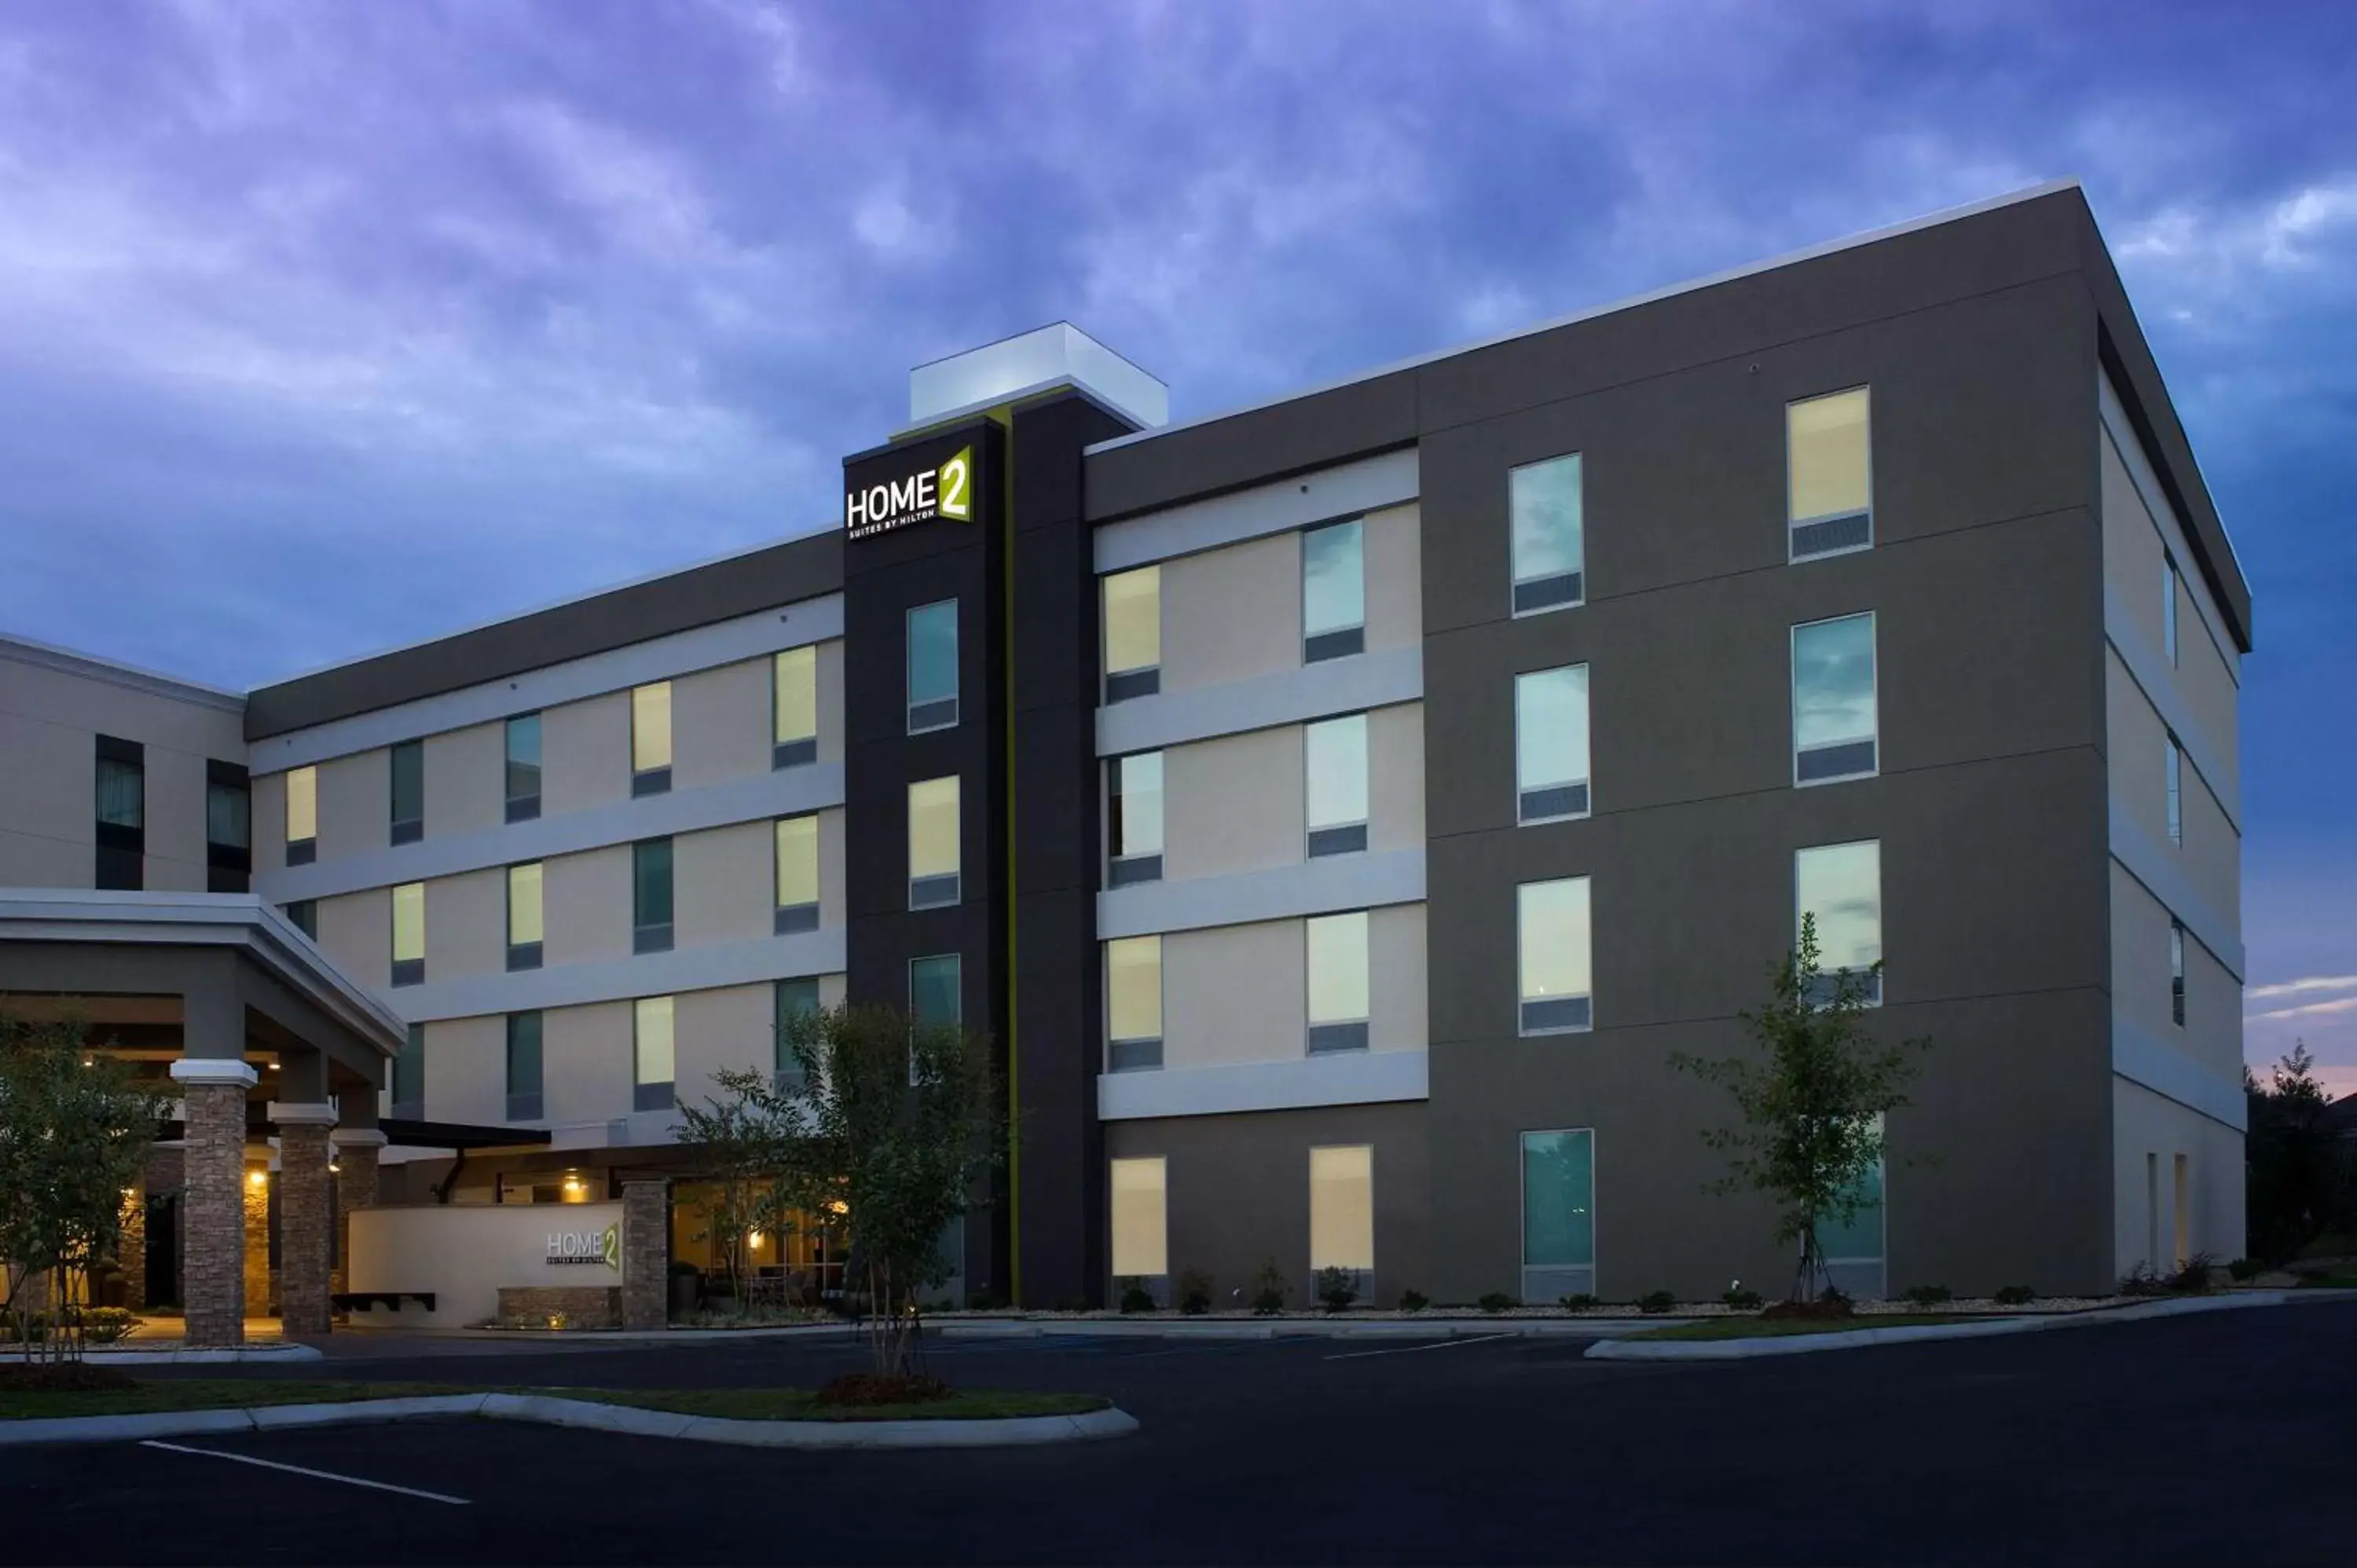 Property Building in Home2 Suites by Hilton Hattiesburg